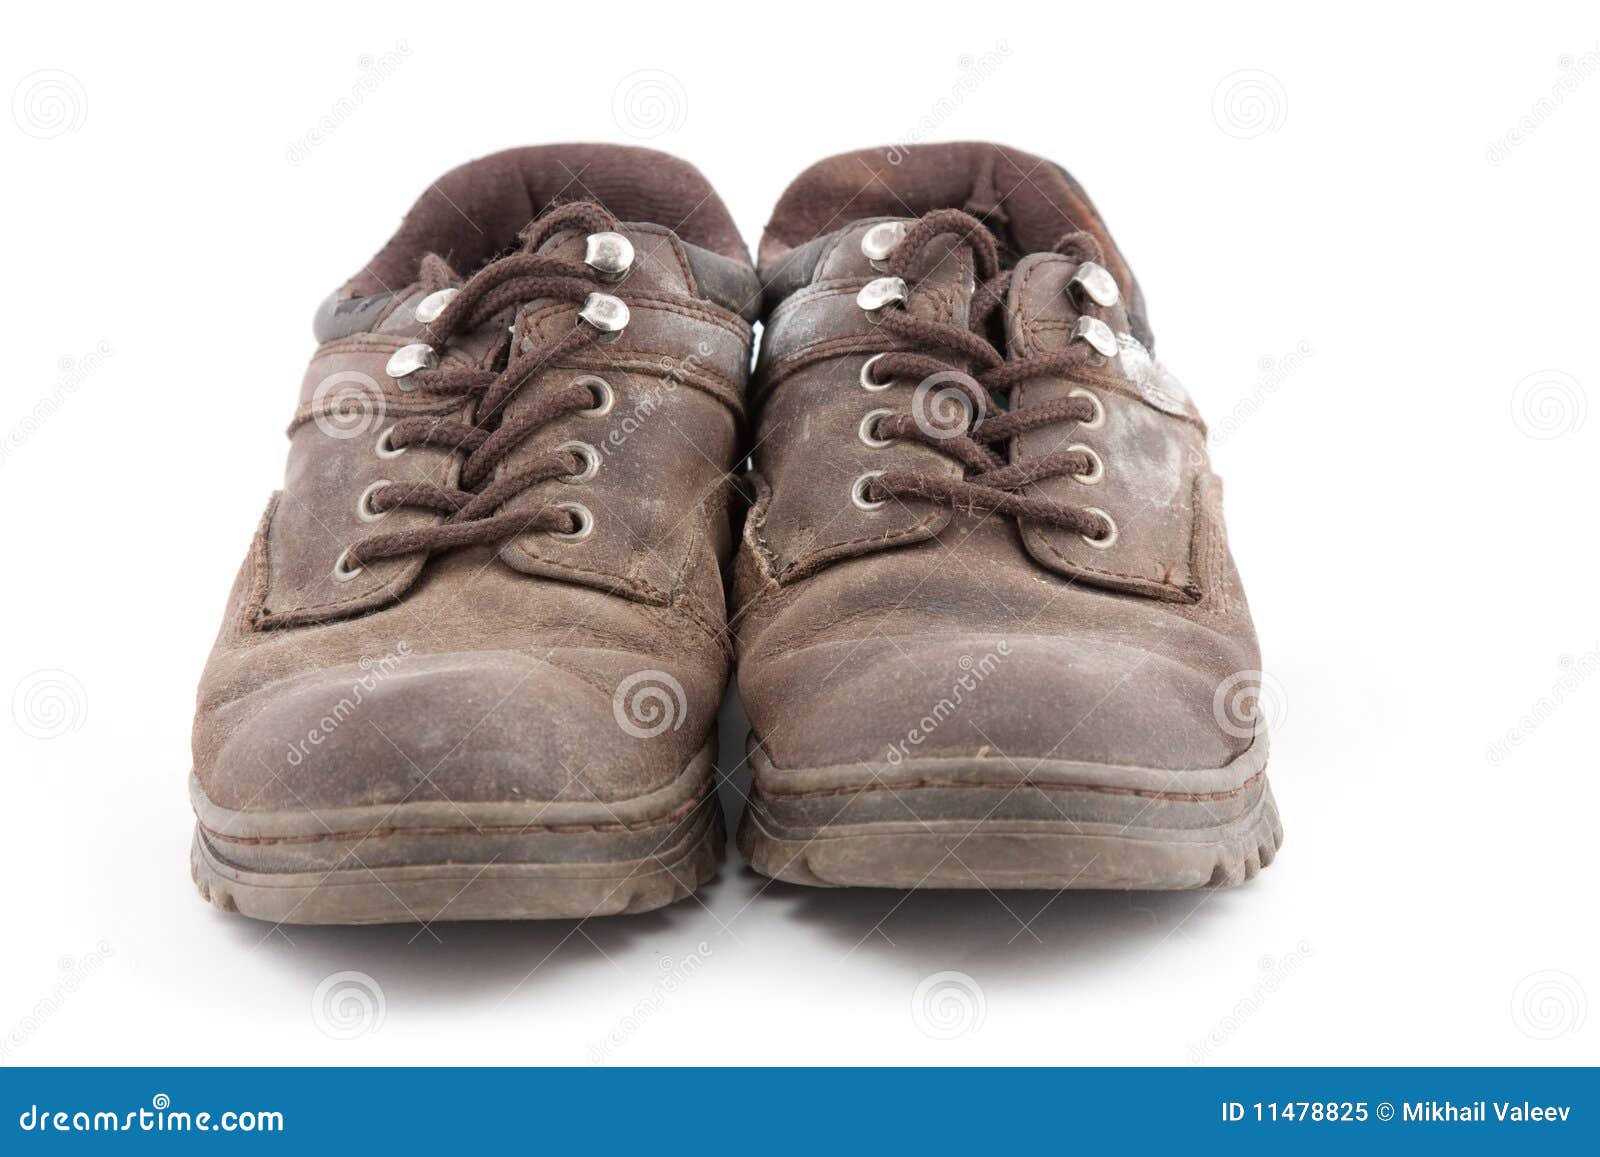 Old boots stock image. Image of feet, shoes, brown, paired - 11478825